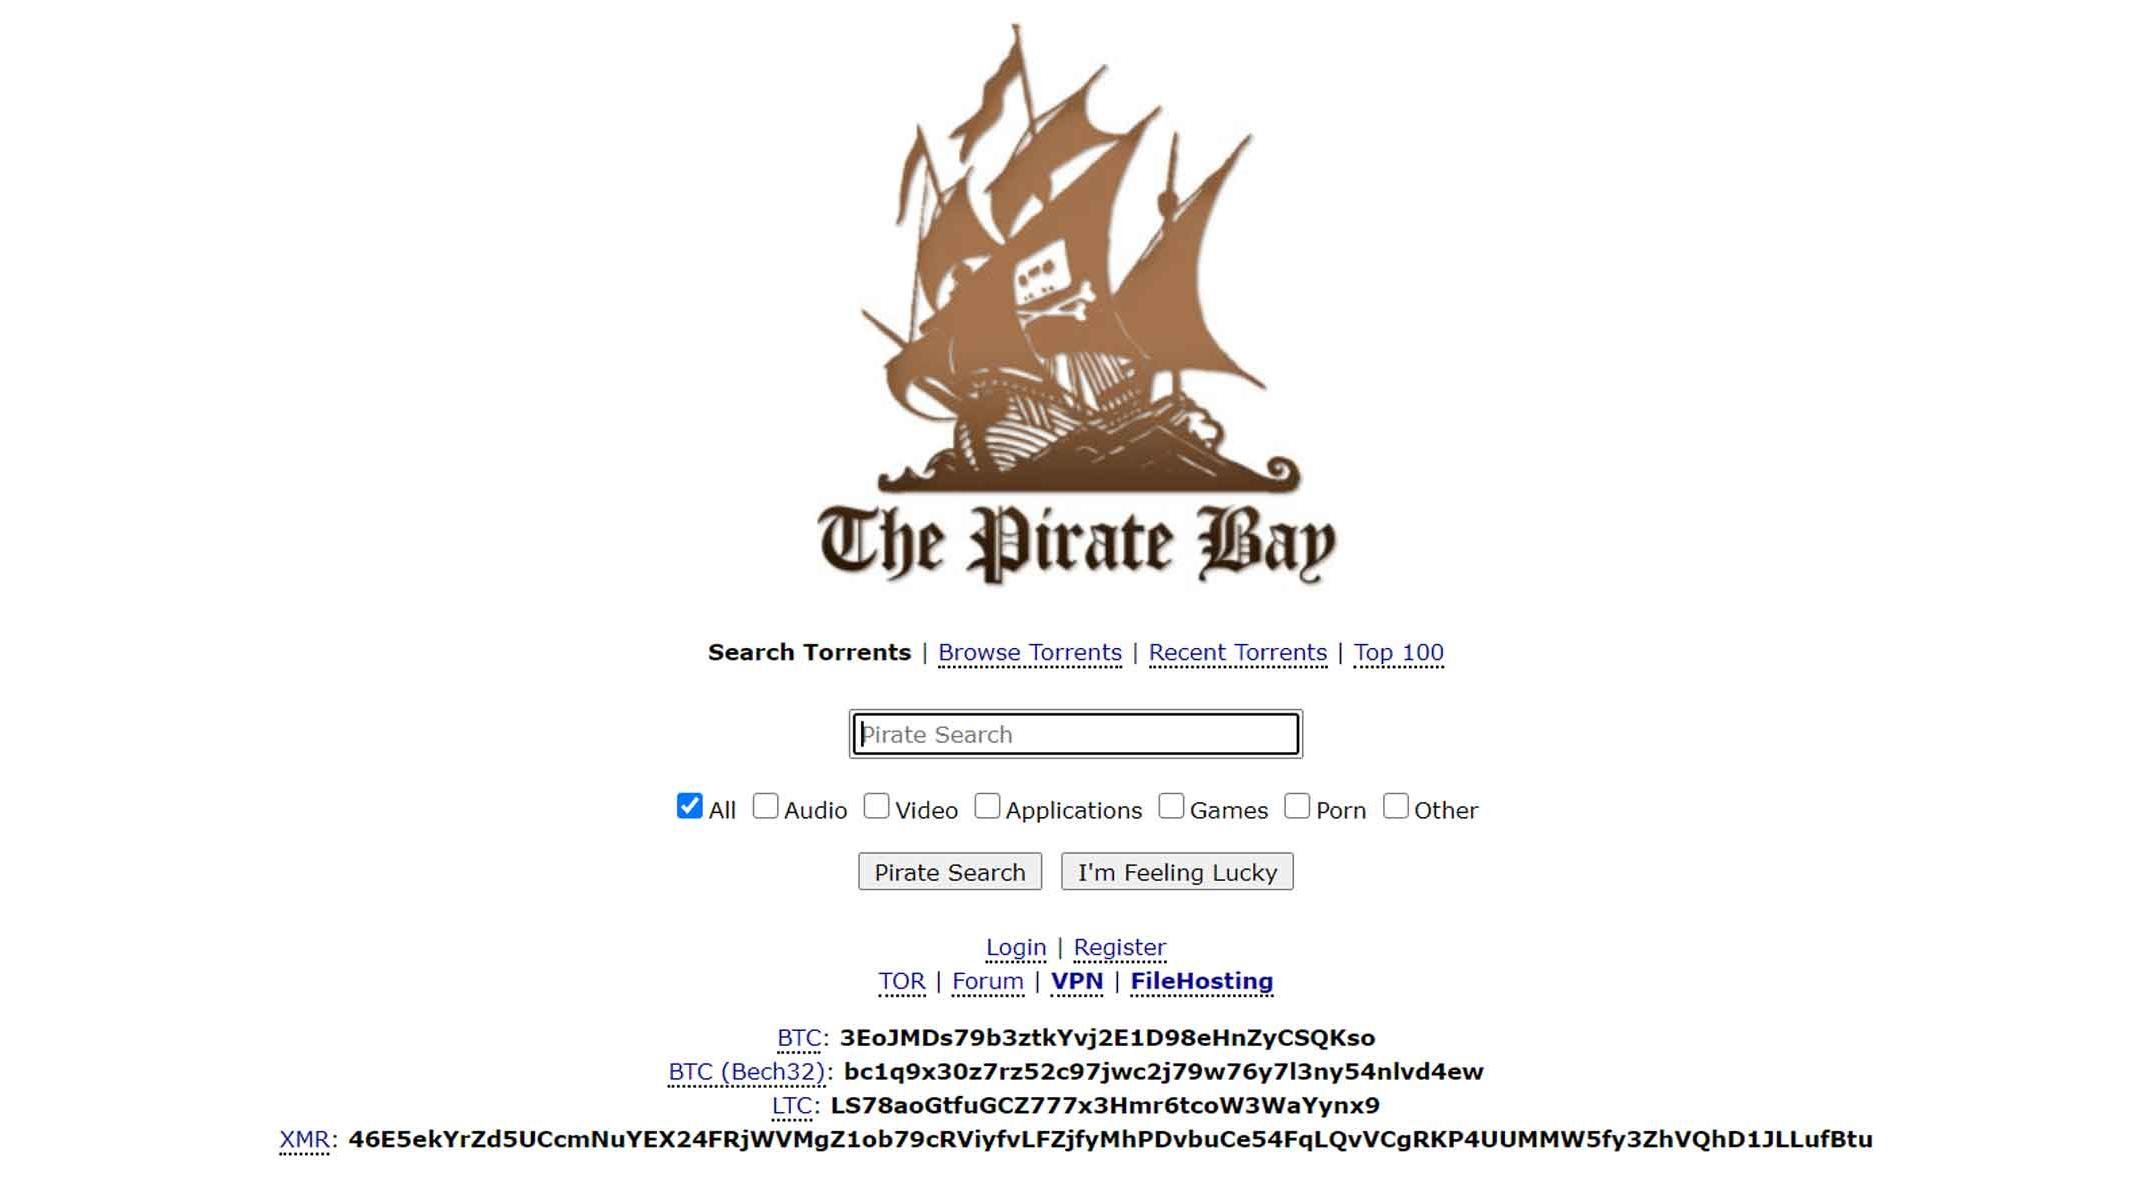 pirate bay microsoft office exell 2010 pirate bay